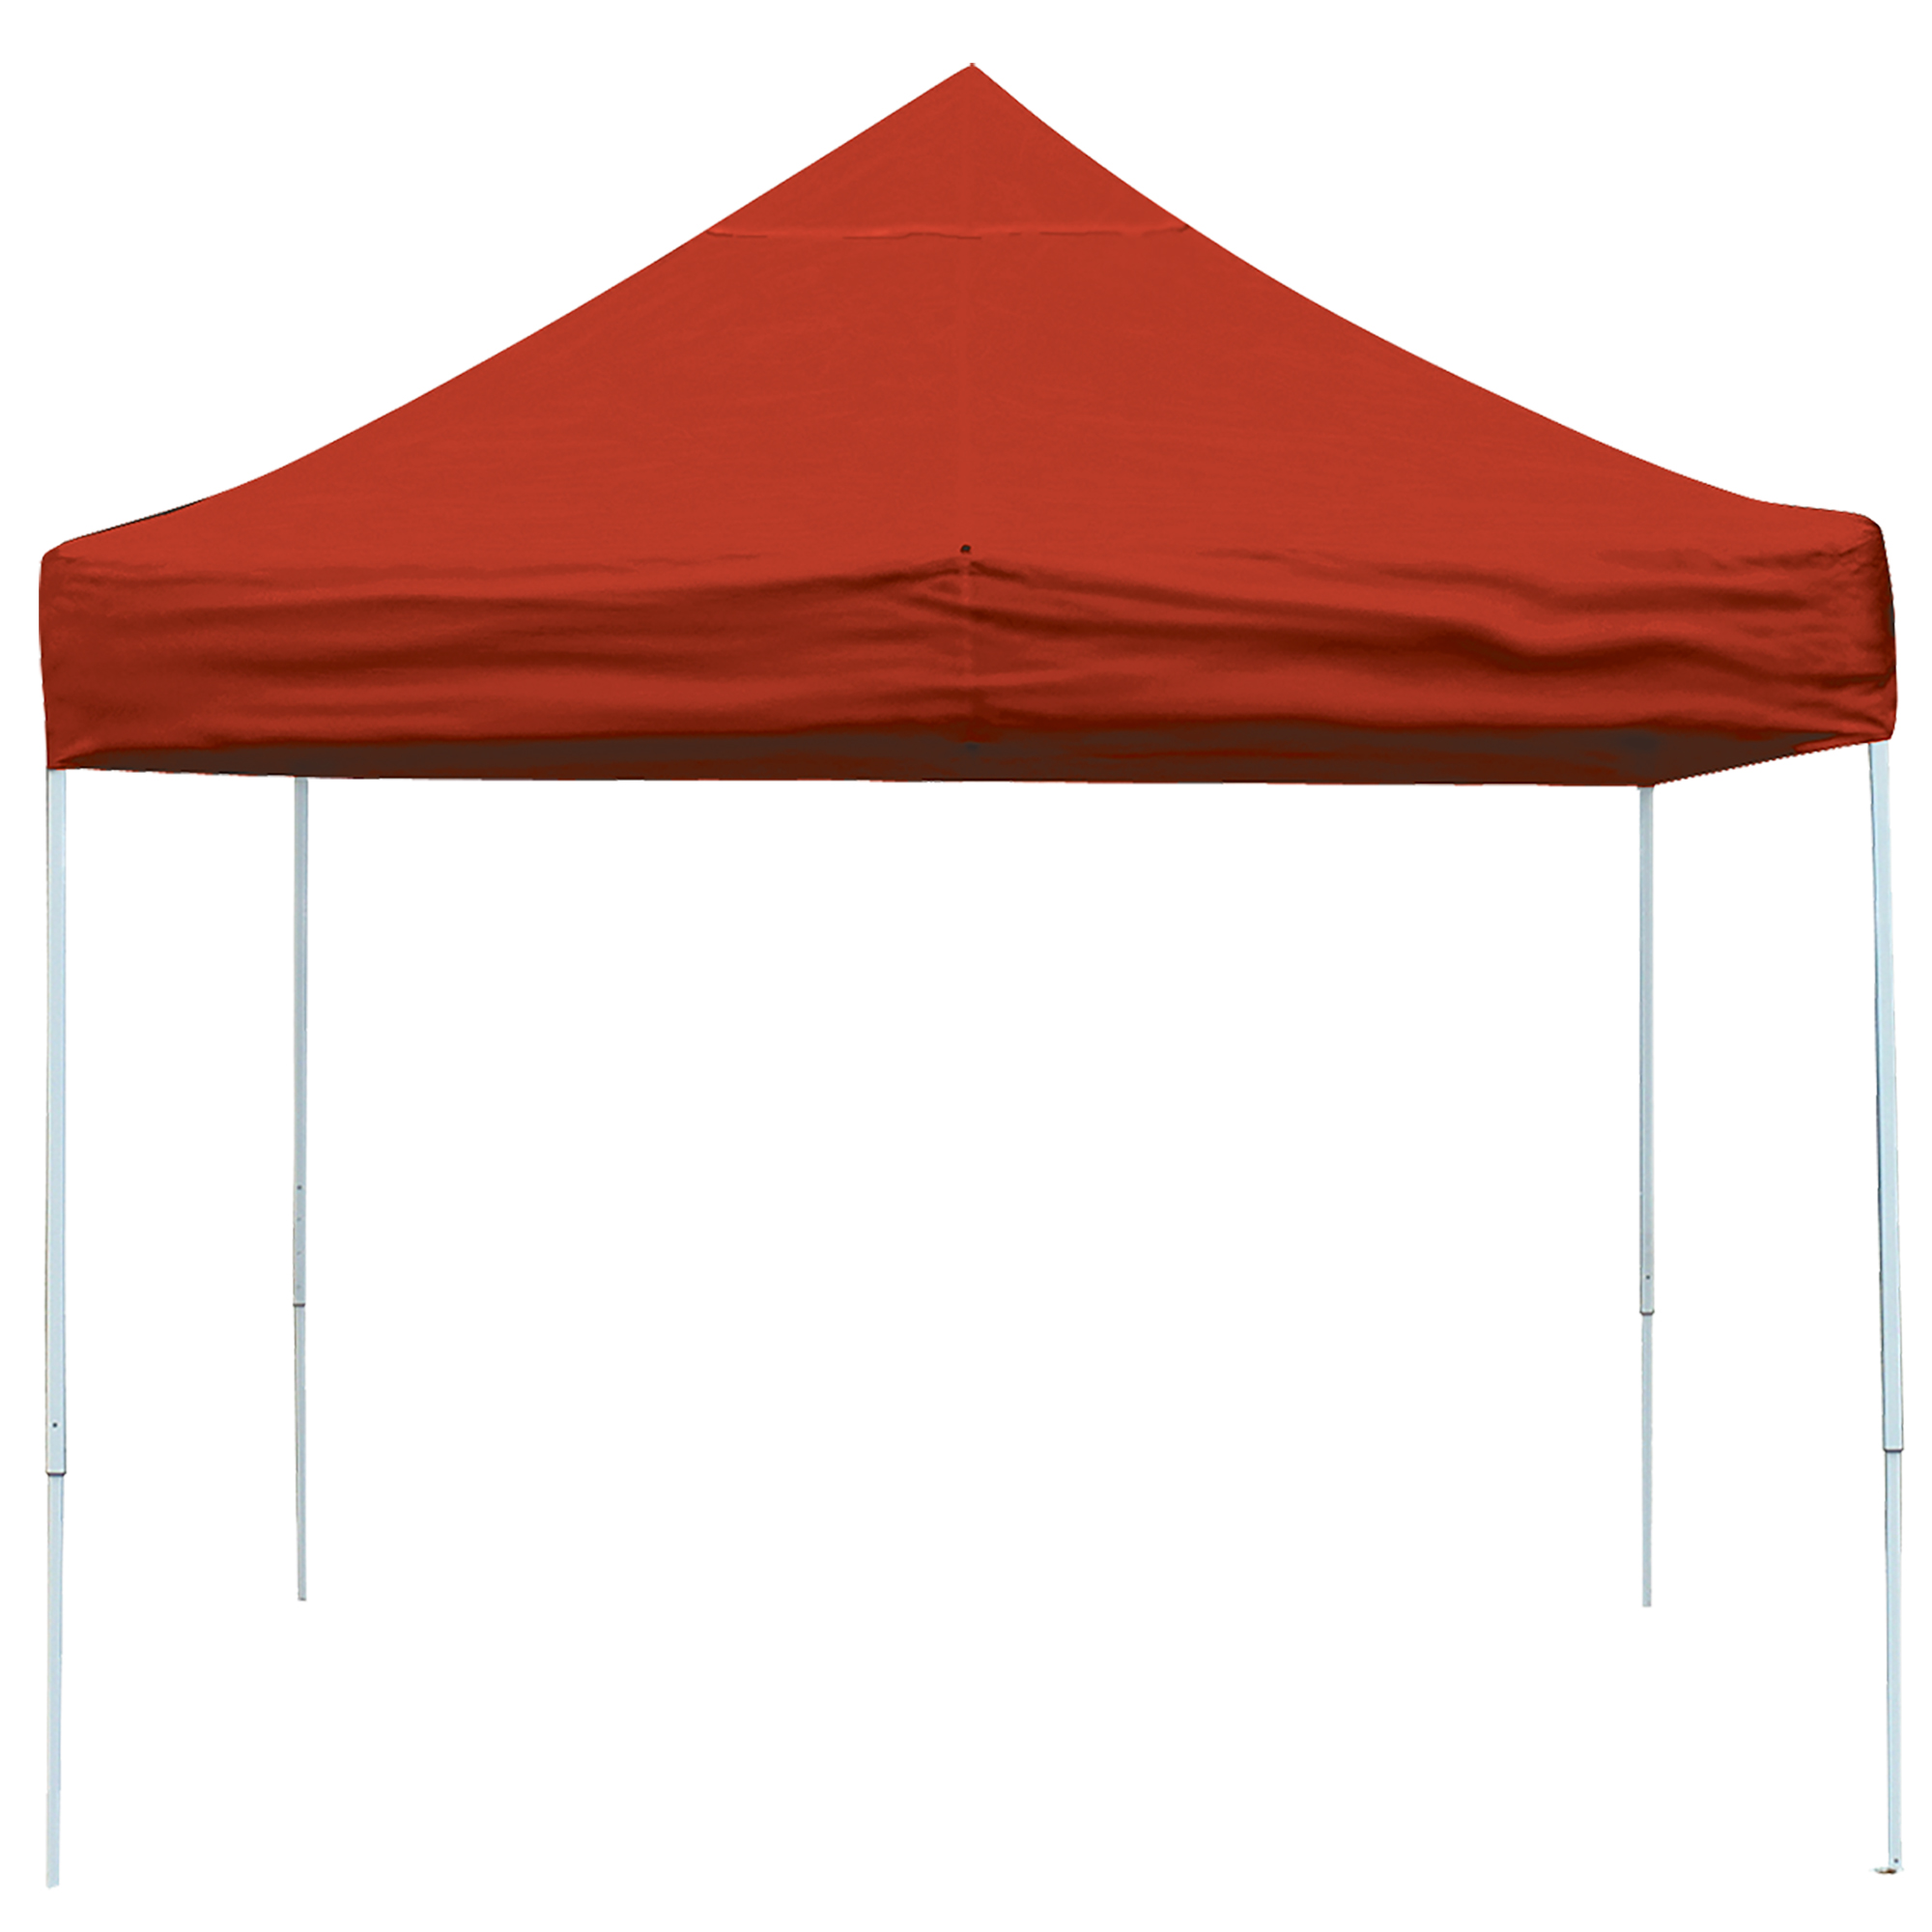 10 Ft. X 10 Ft. Pro Pop-up Canopy Straight Leg, Red Cover